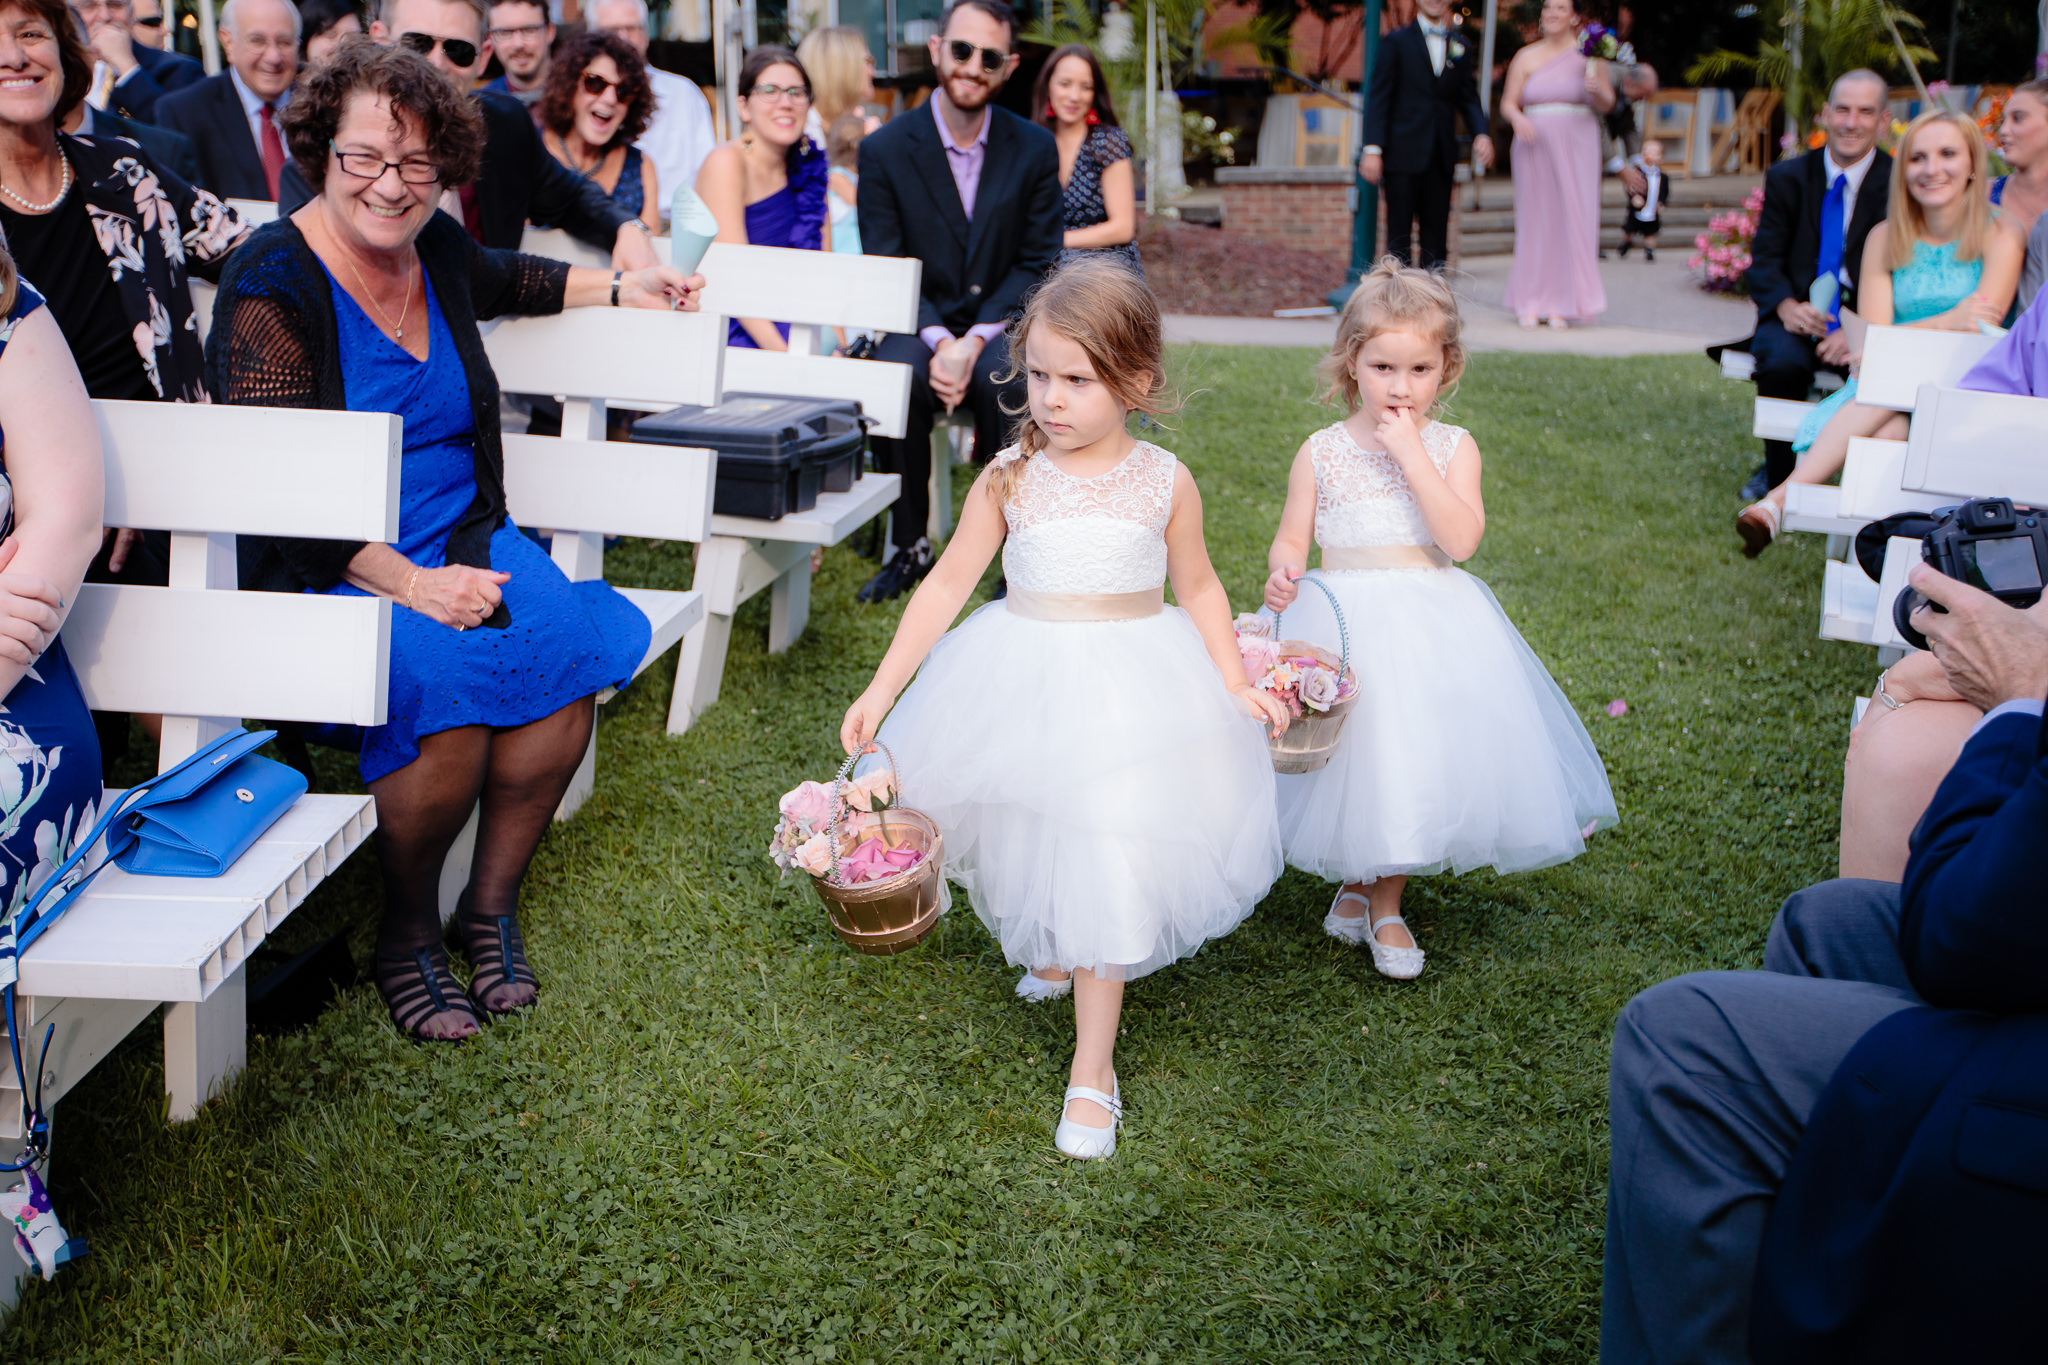 Flower girls walk down the aisle at an outdoor National Aviary wedding ceremony